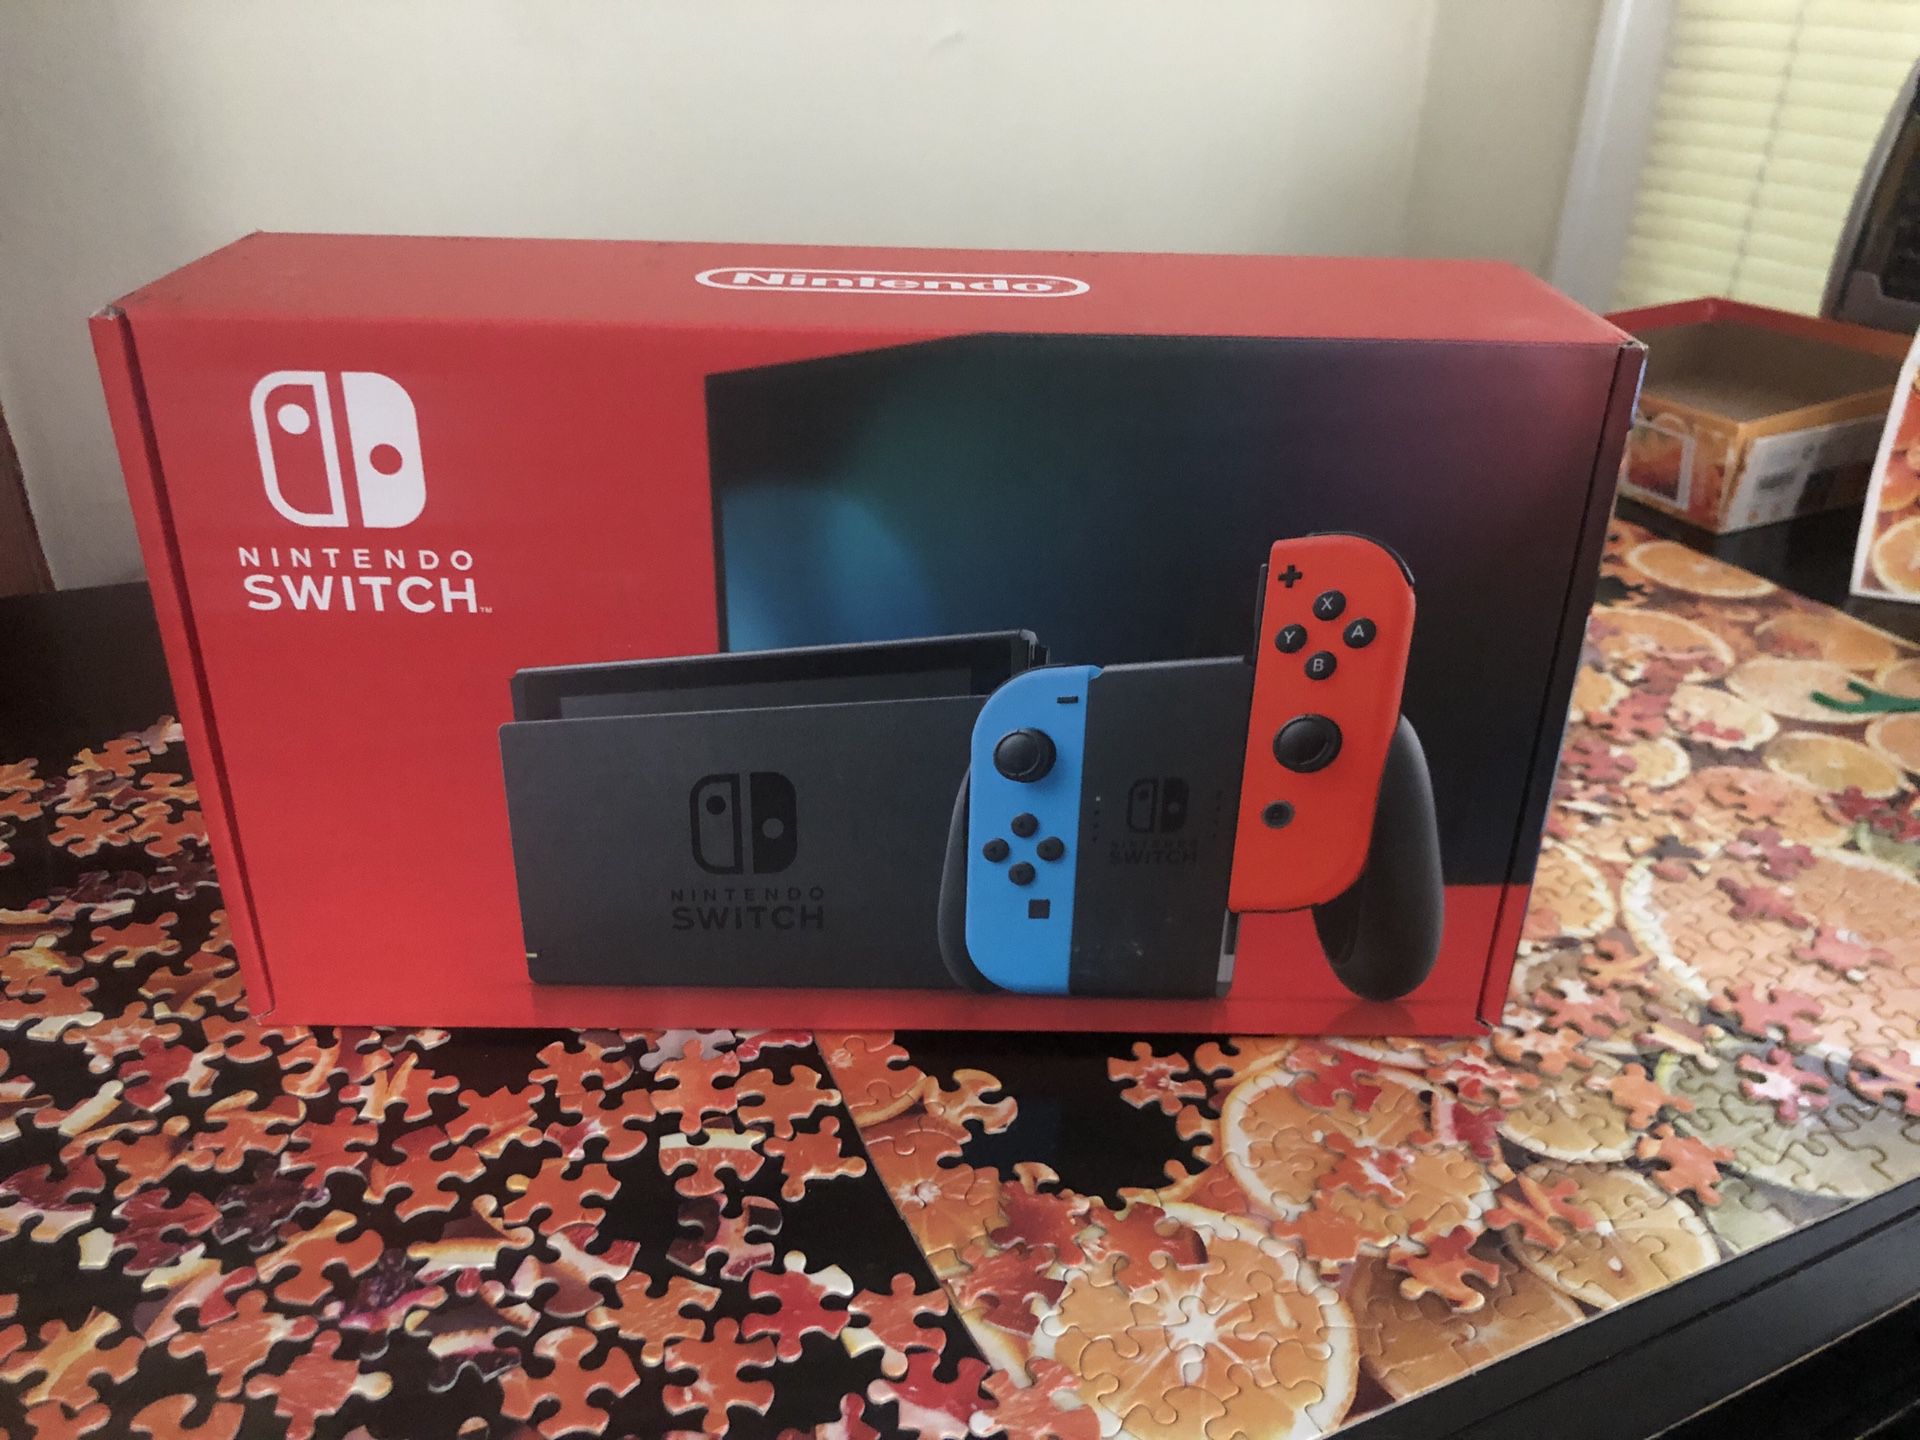 Brand new Nintendo Switch V2 32GB w/ red and blue joy-cons